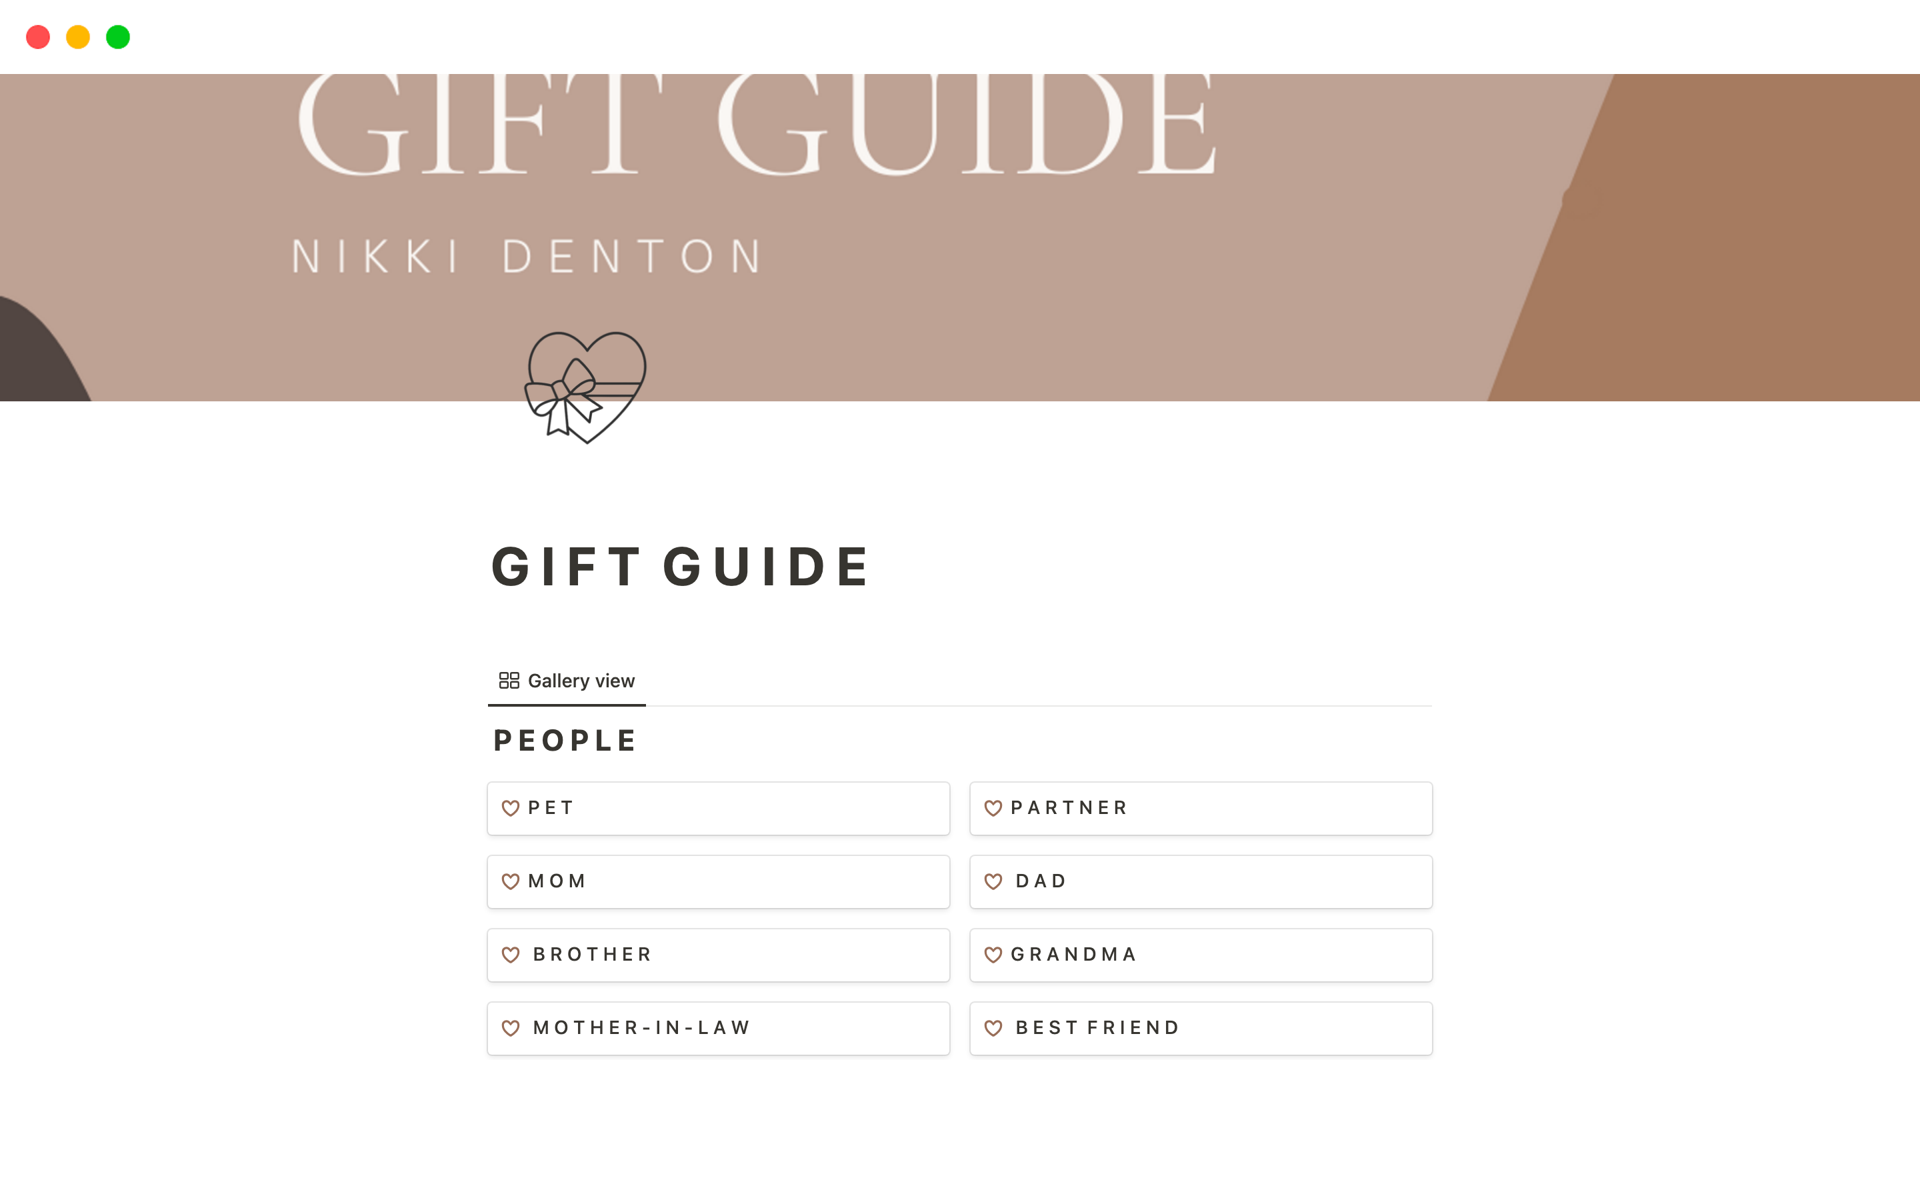 Designed to meet all your gifting needs, this template enables you to effortlessly keep track of your loved ones' preferences, including your budget, their desired gifts, and even product links. 